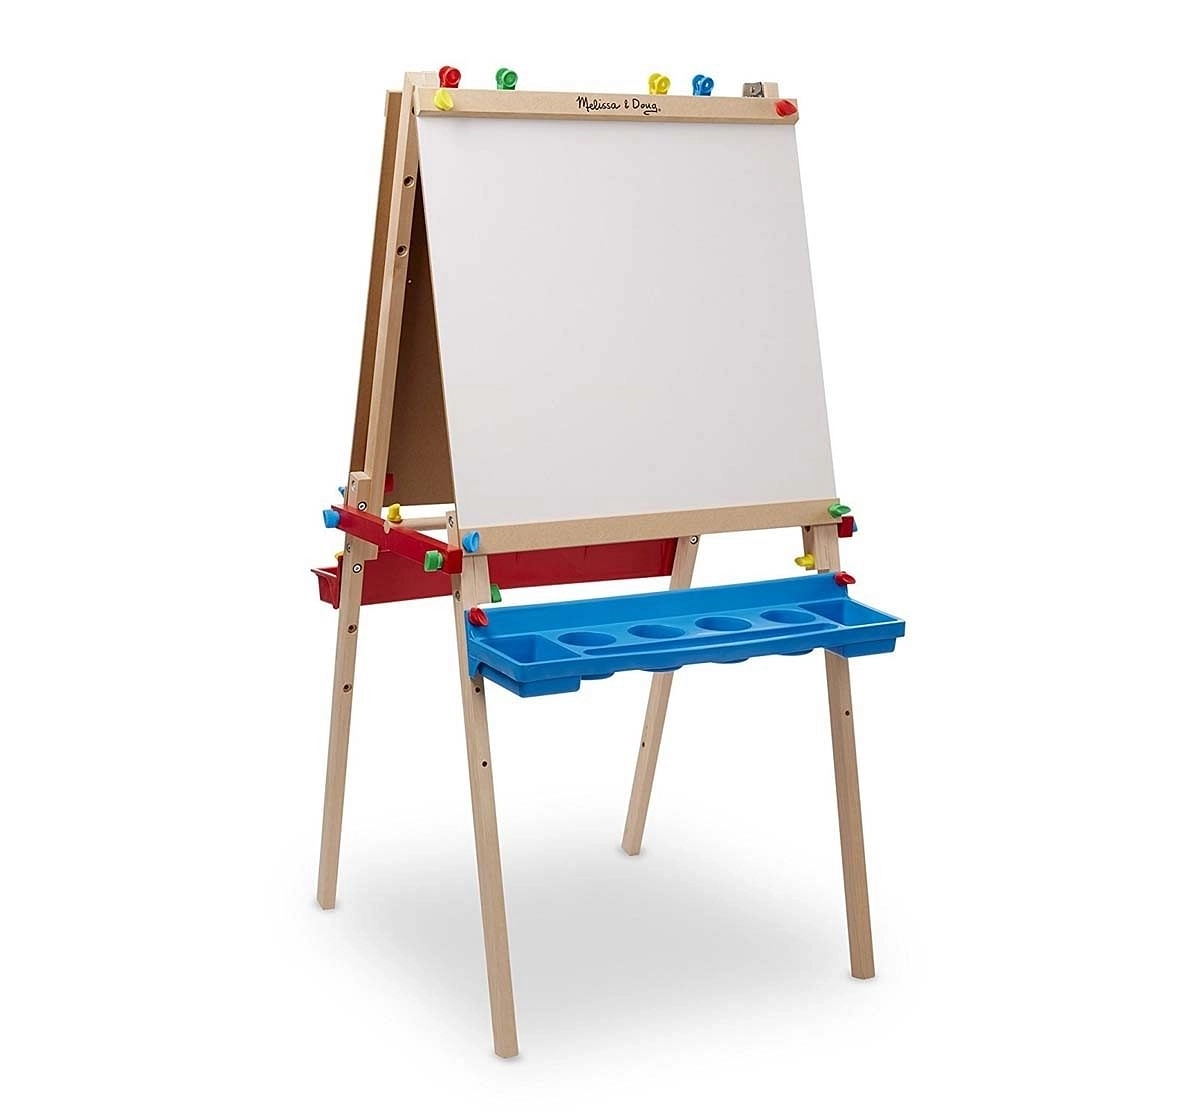 Melissa & Doug White Deluxe Wooden Standing Art Easel Activity Table & Boards for Kids age 3Y+